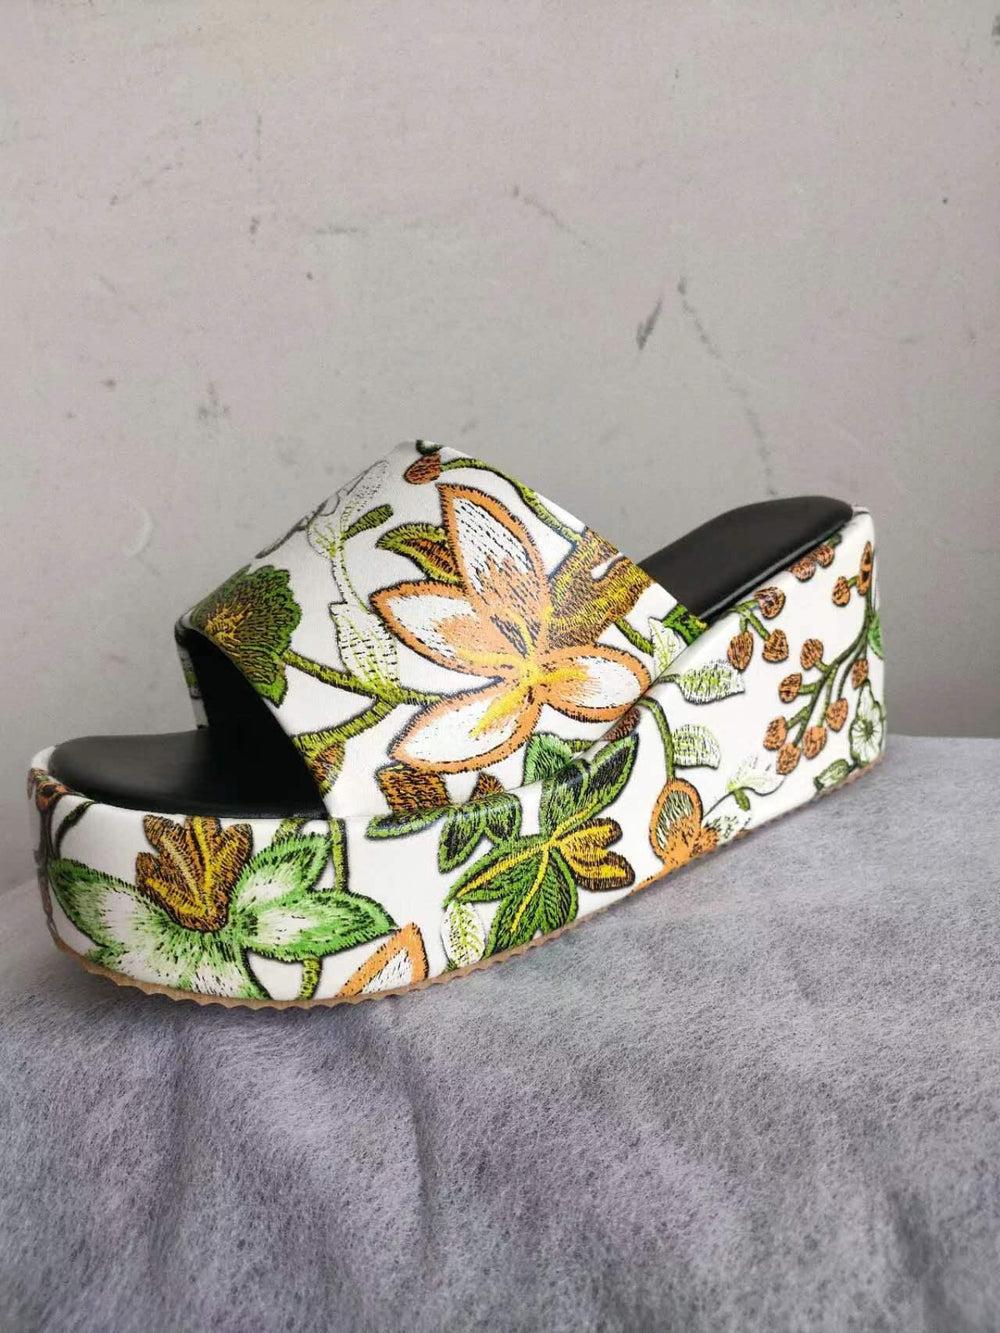 New Round Toe Wedge Embroidered Classic Embroidery Slippers For Women - EX-STOCK CANADA